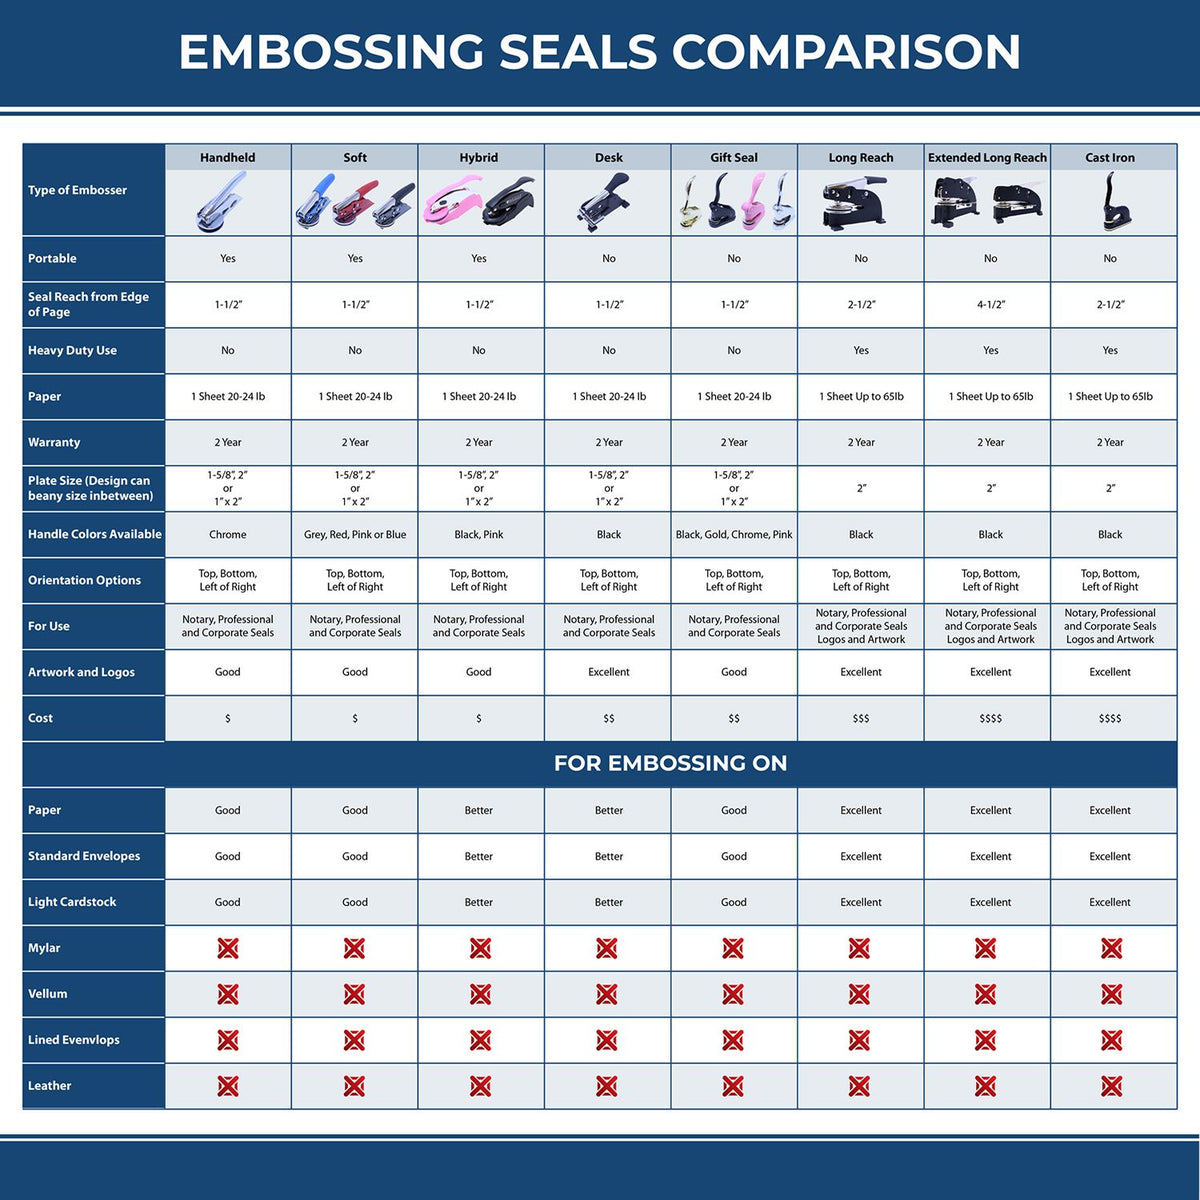 A comparison chart for the different types of mount models available for the Hybrid Nebraska Geologist Seal